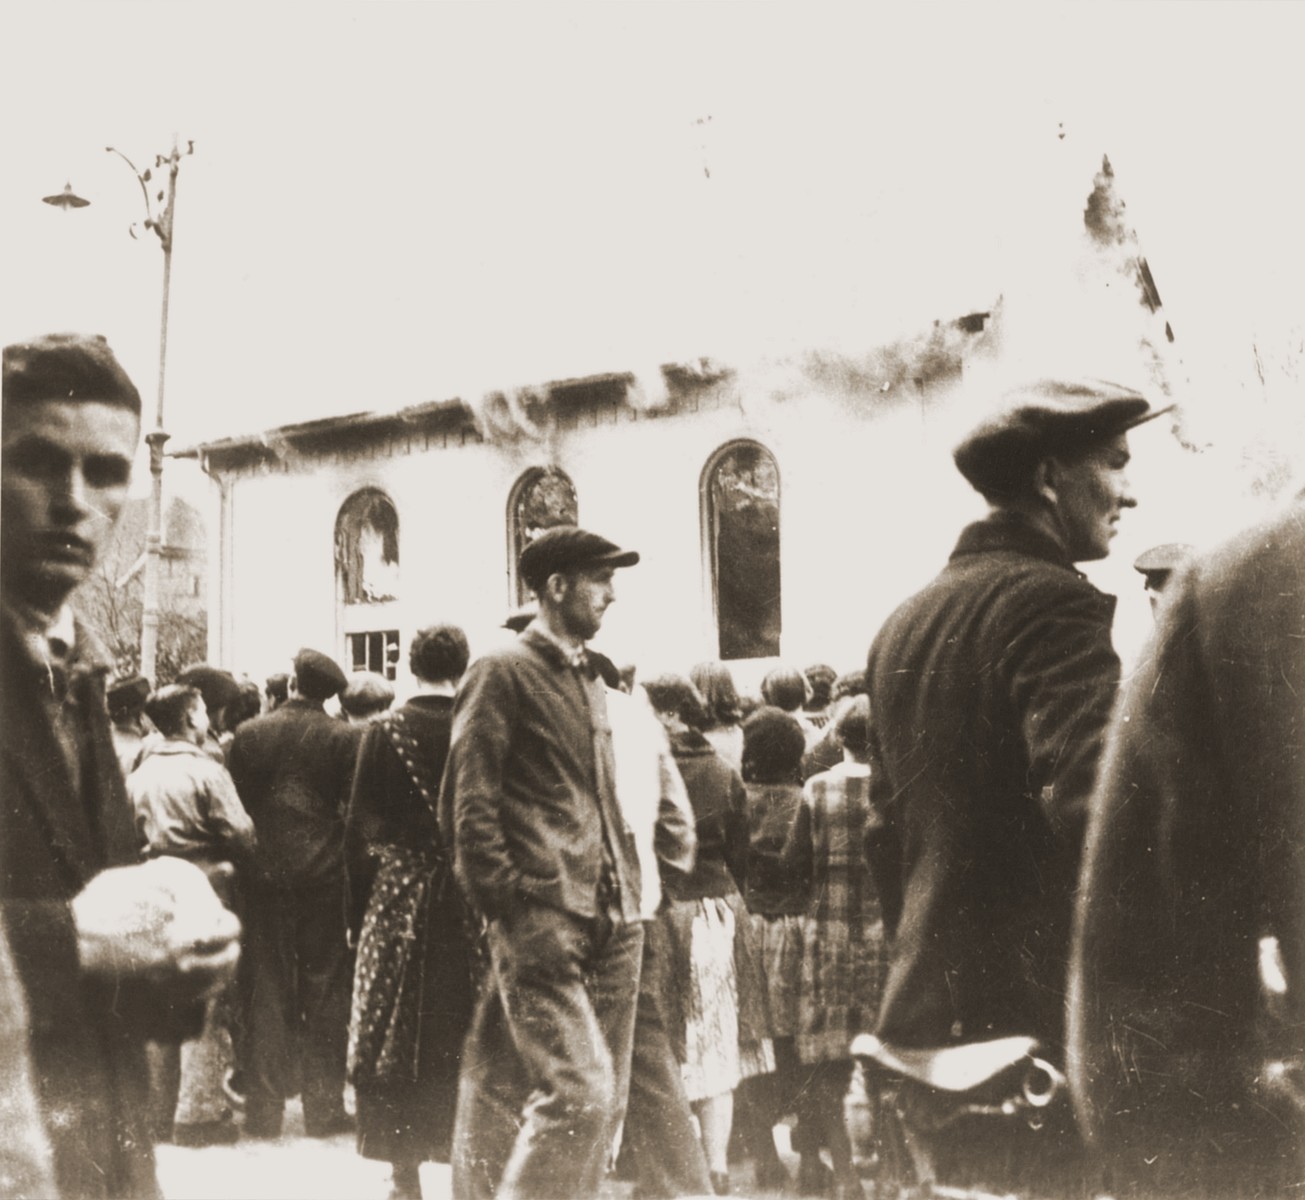 On the morning after Kristallnacht local residents watch as the Ober Ramstadt synagogue is destroyed by fire.   The local fire department prevented the fire from spreading to a nearby home, but did not try to limit the damage to the synagogue.